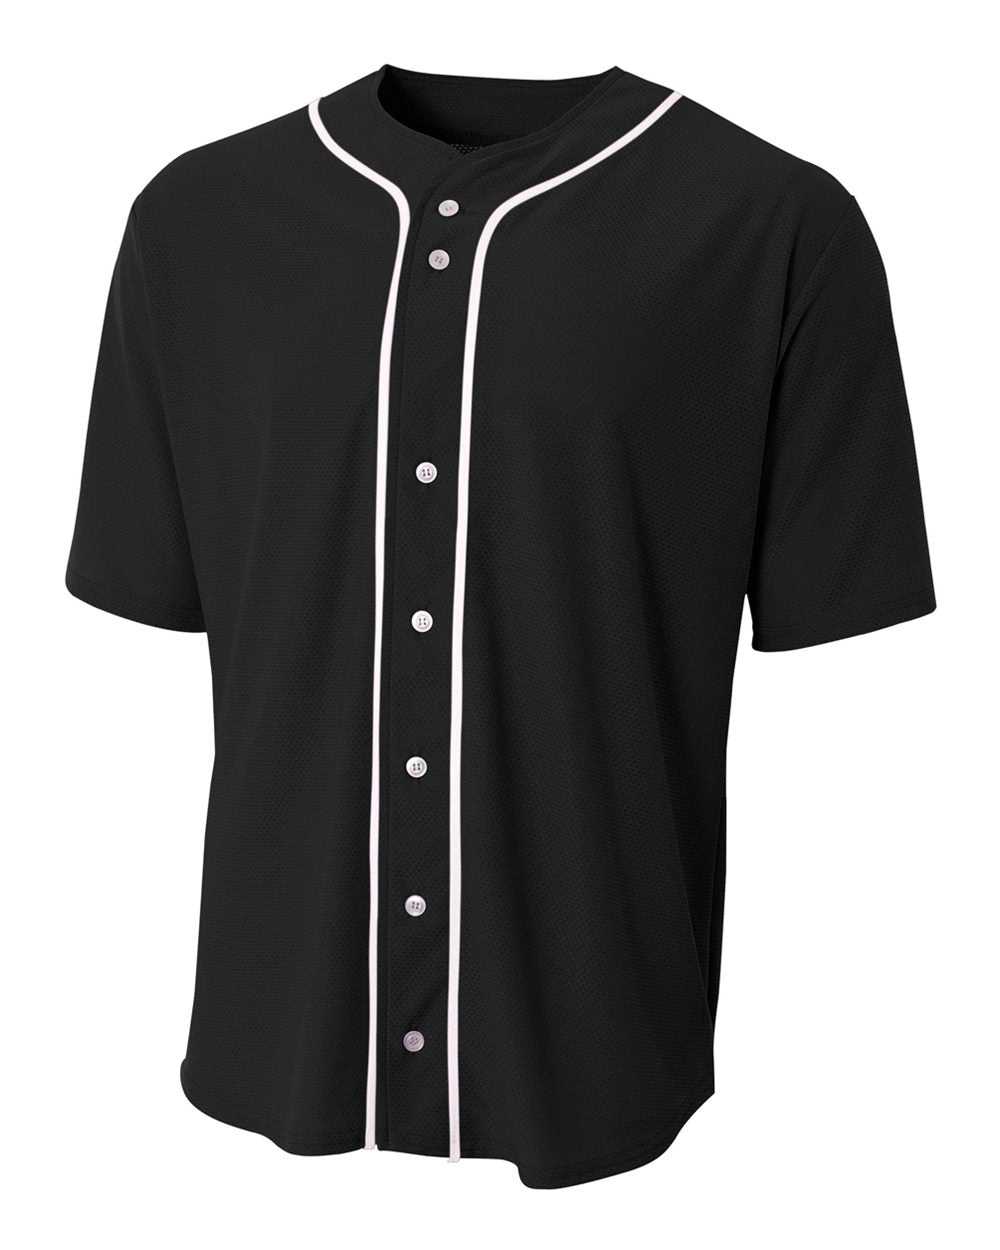 A4 NB4184 Youth Full Button Stretch Mesh Baseball Jersey - Black White - HIT a Double